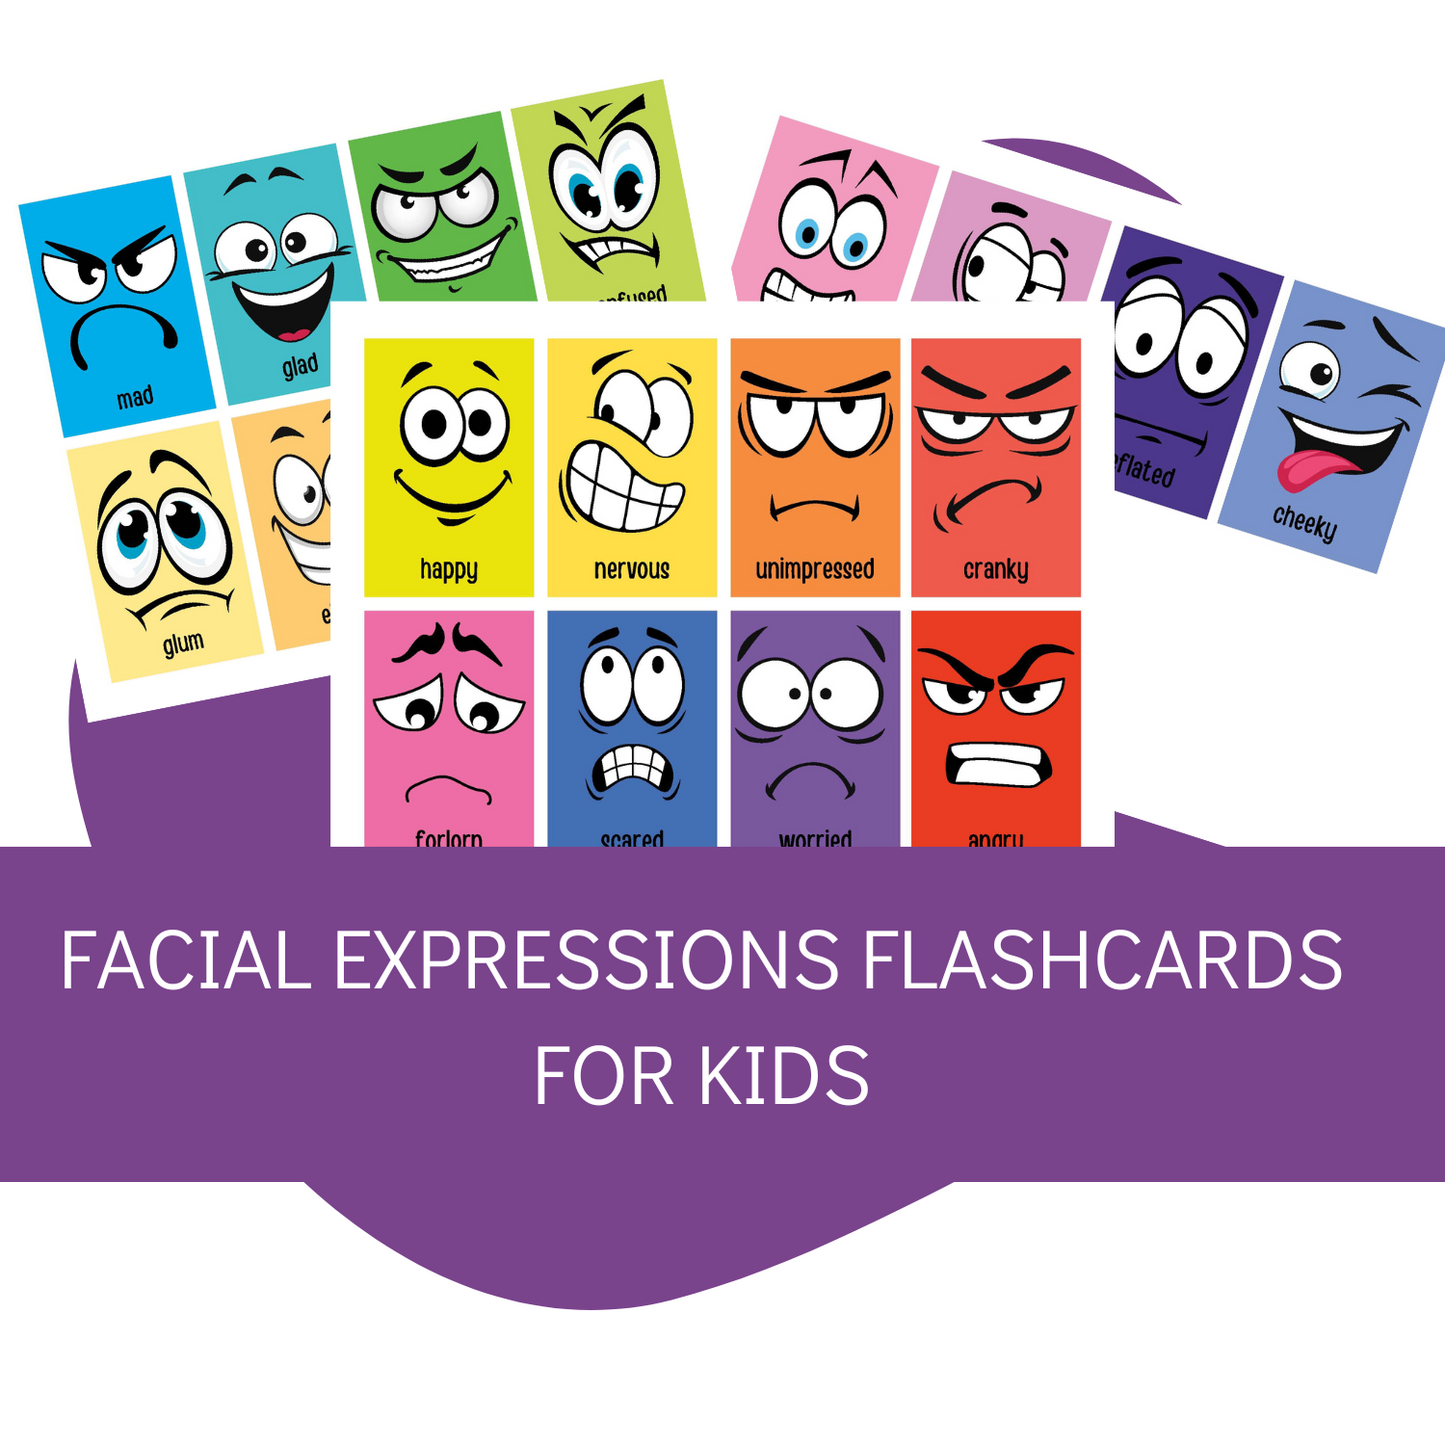 Facial Expressions Flashcards for Kids